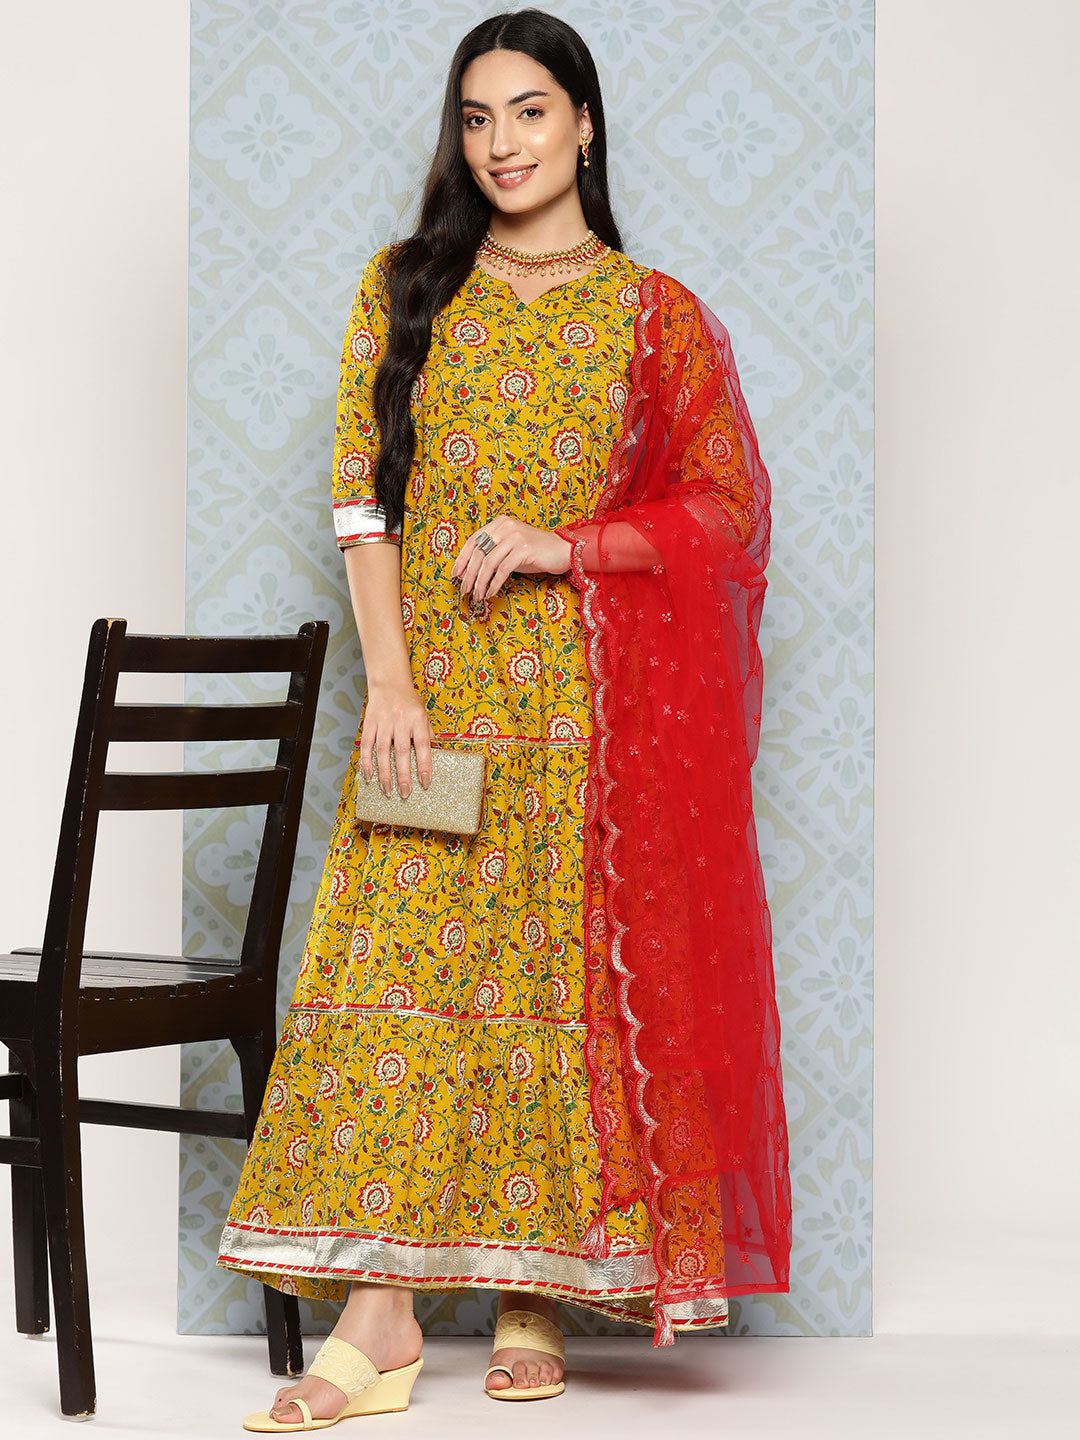 Women's Yellow Floral Printed Flared Dress With Scalloped Dupatta - Nayo Clothing